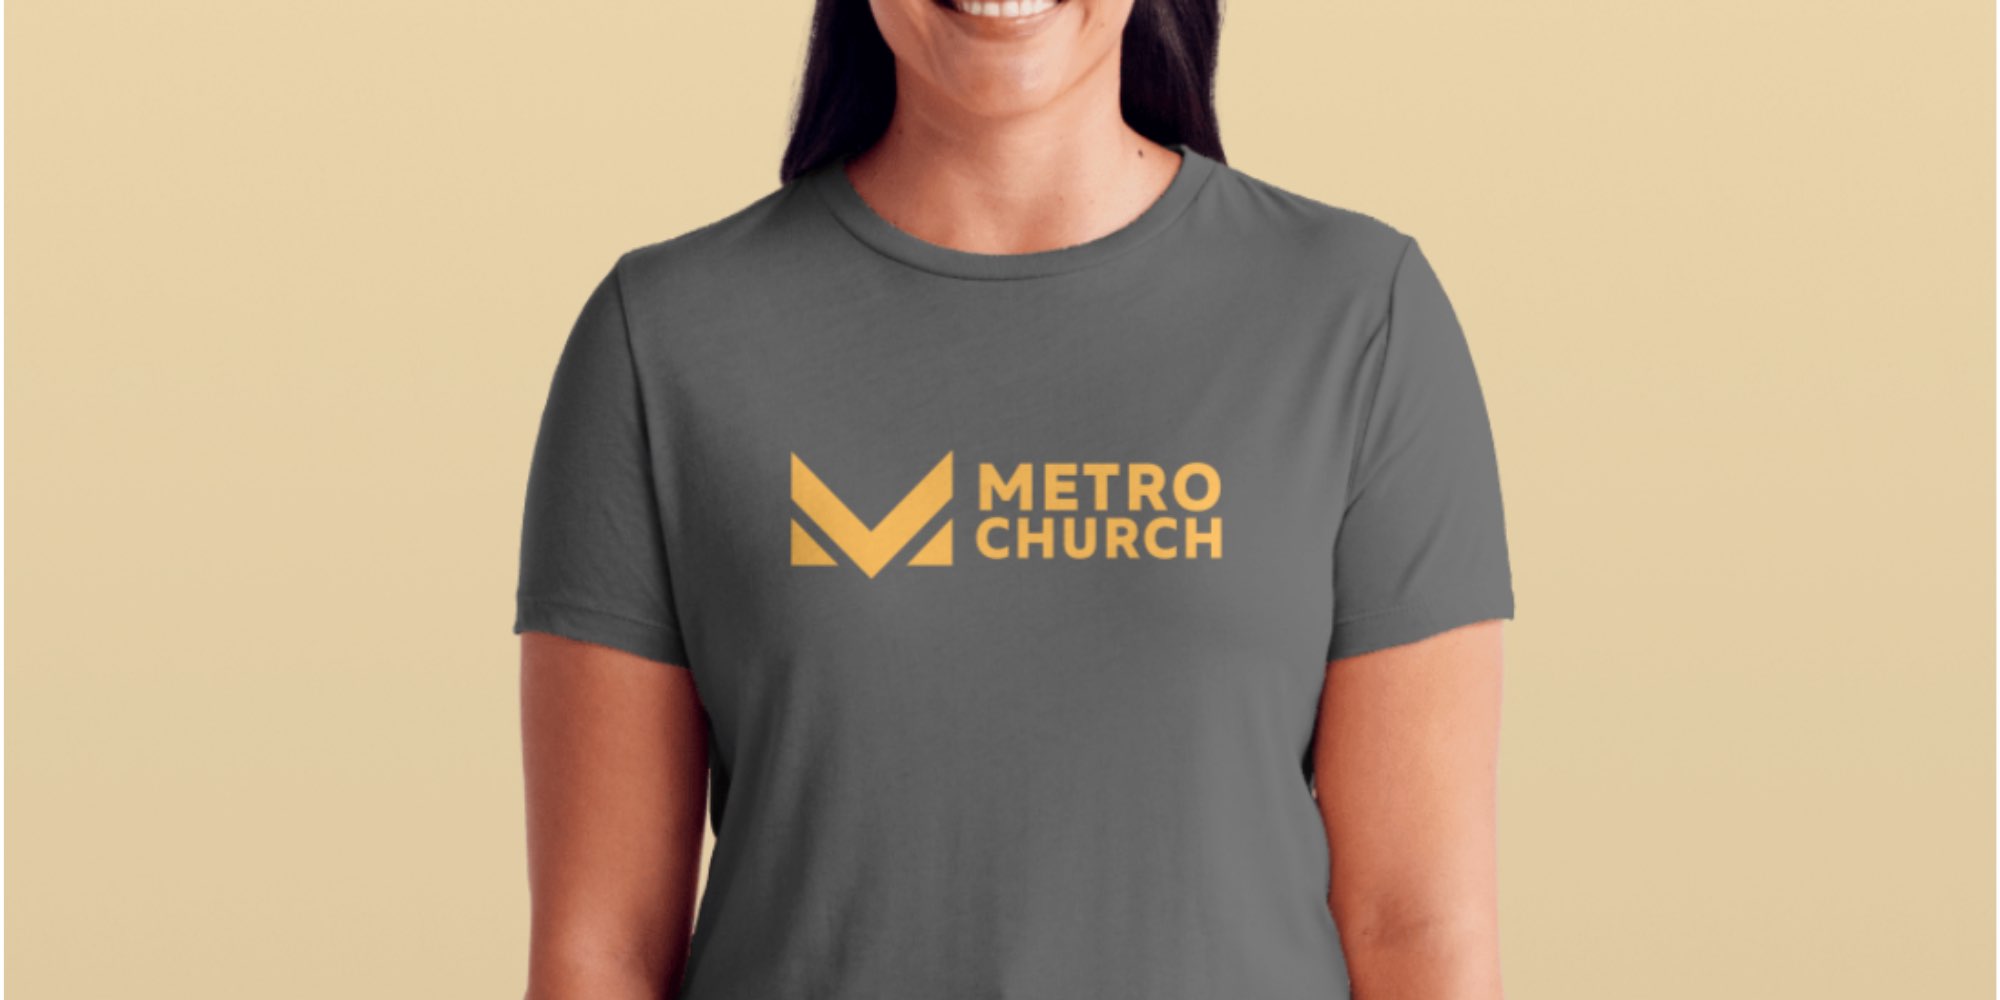 Canva t-shirt mockup generator will give you great and easy to use designs for all your church swag